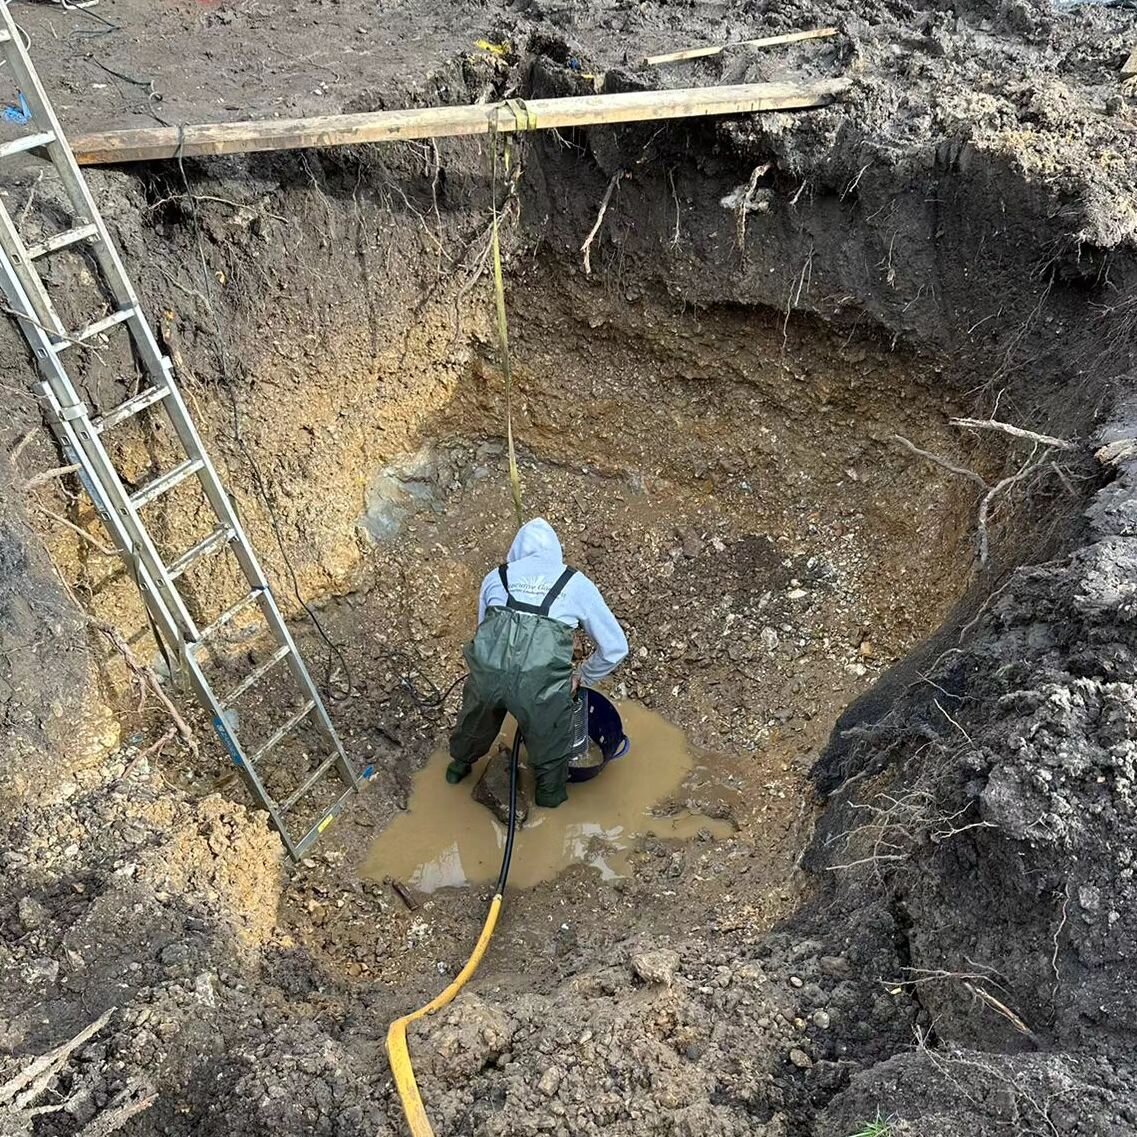 A huge hole is being dug in preparation for a natural swimming pond for this garden. Good progress despite the wet weather. It will be beautiful!

#chloeluxongardendesign
Build #executivegardensuk